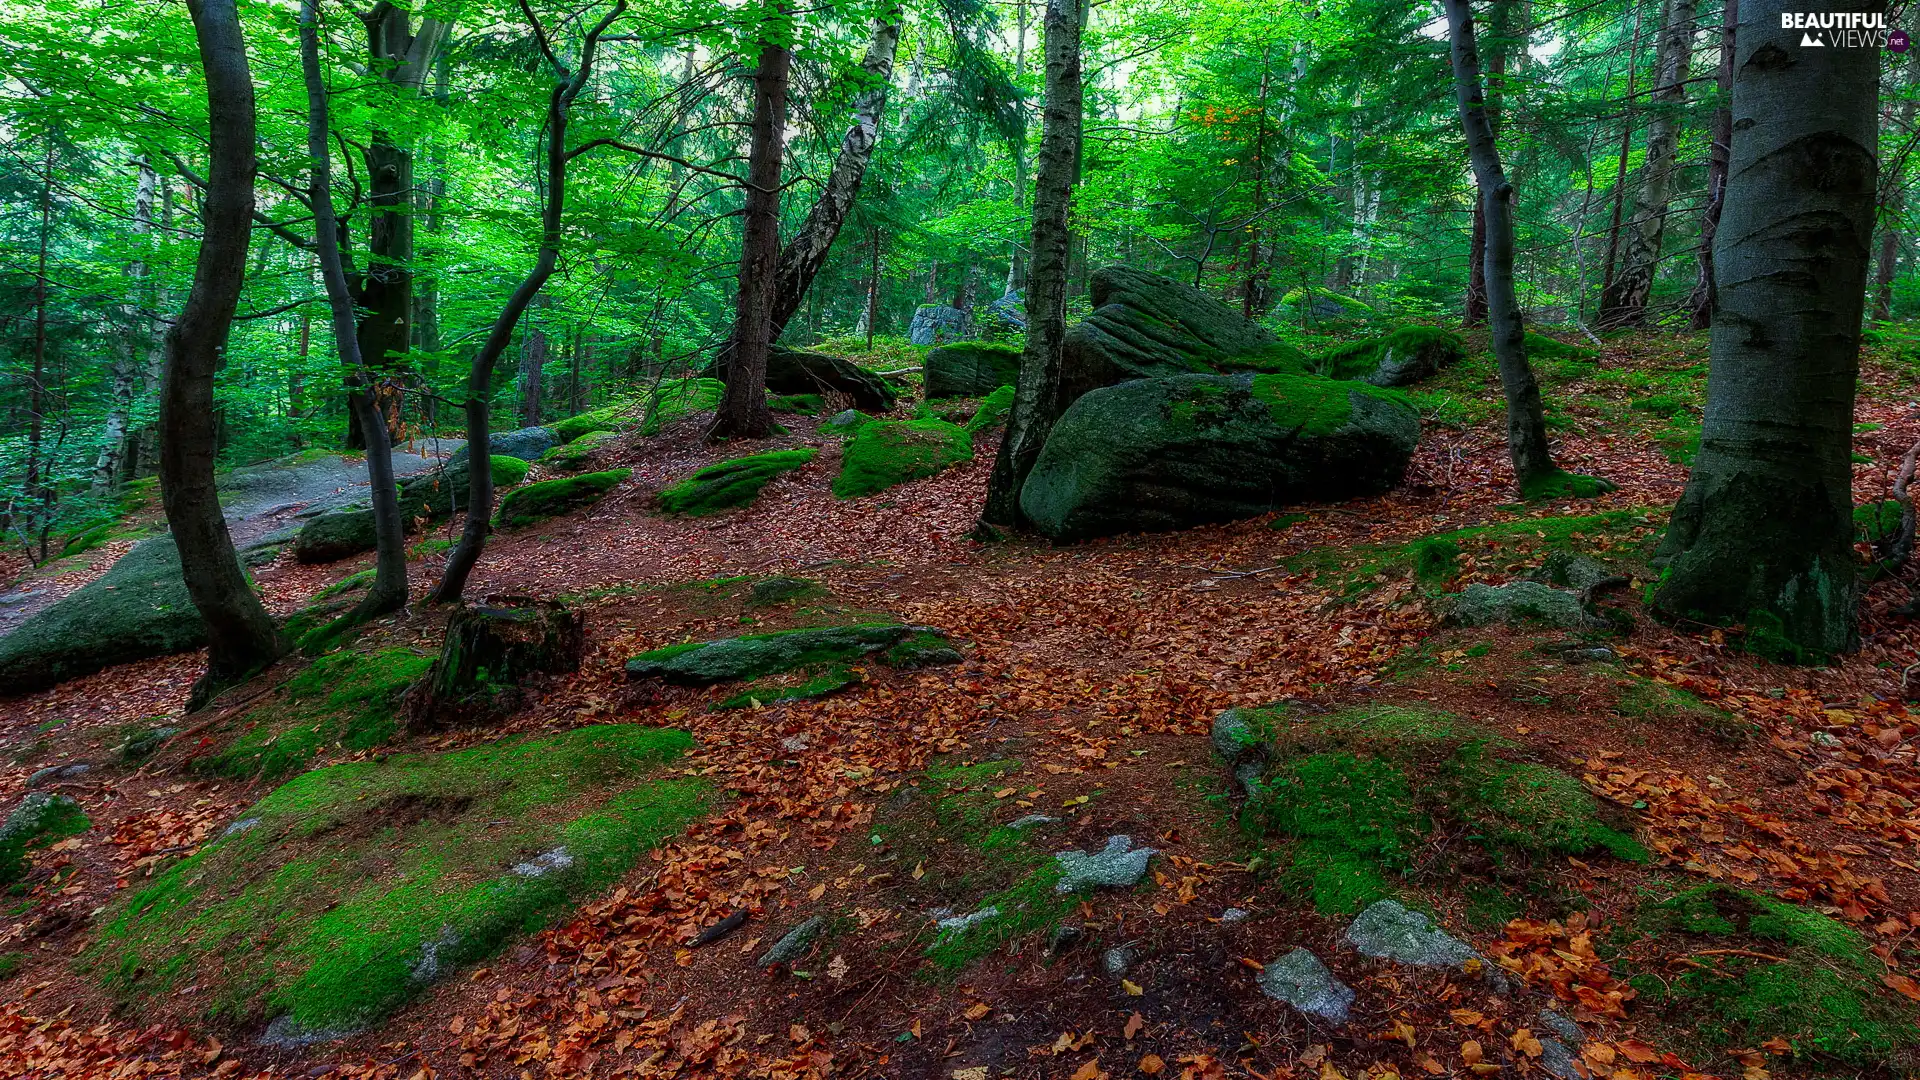 trees, Spring, mossy, green ones, forest, viewes, Stones